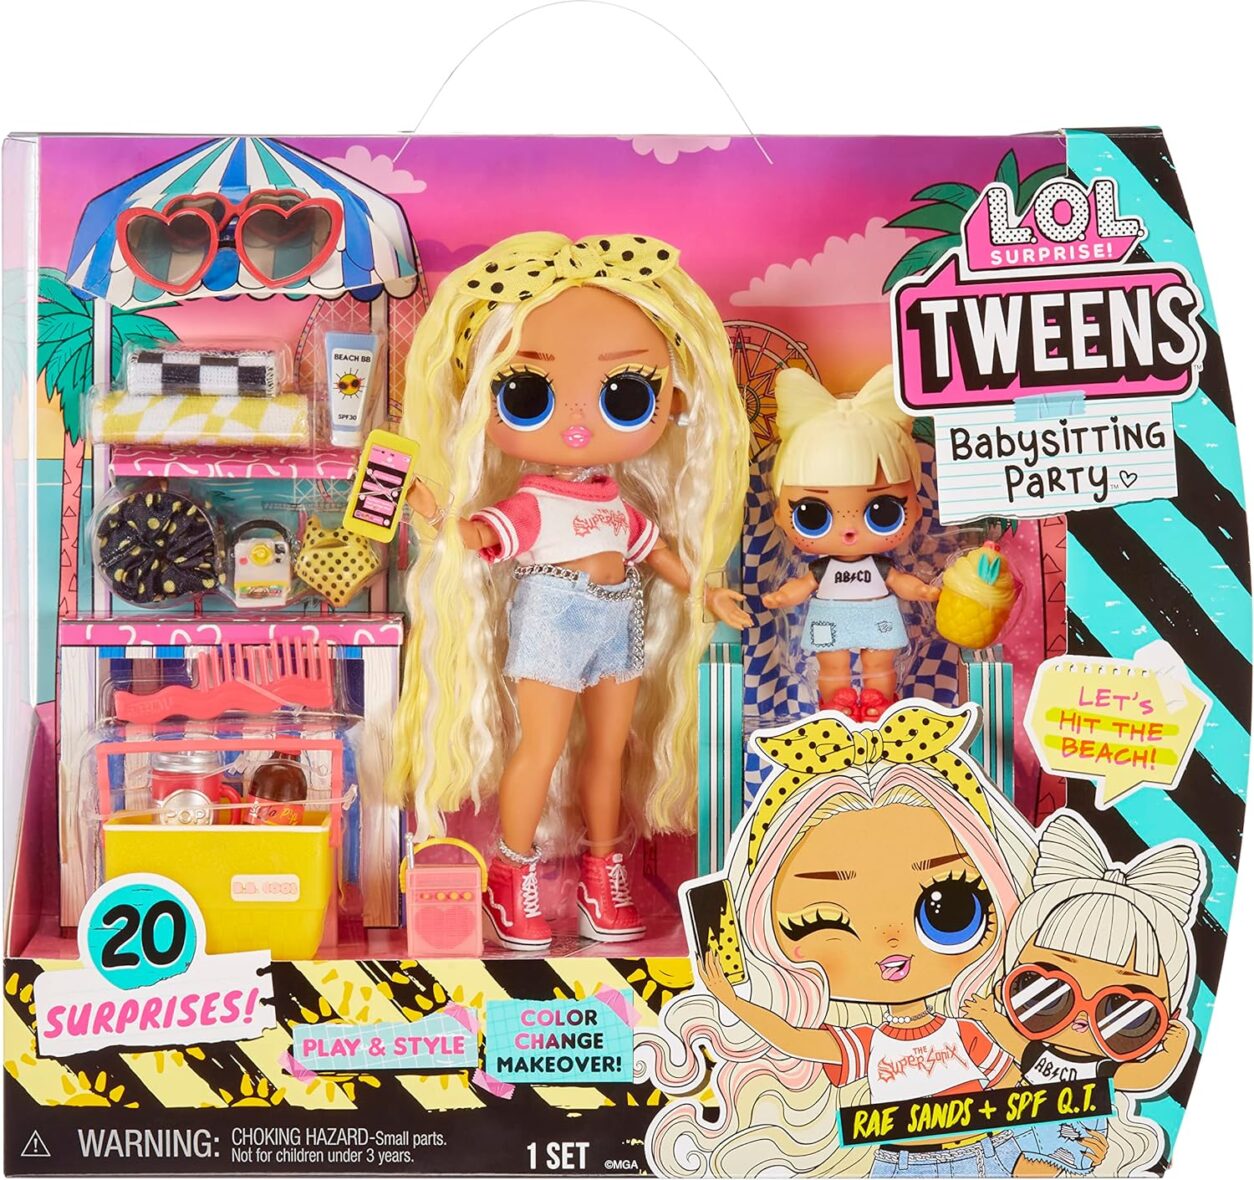 L.O.L. Surprise! Tweens Babysitting Beach Party with 20 Surprises Including Color Change Features and 2 Dolls – Great Gift for Kids Ages 4+